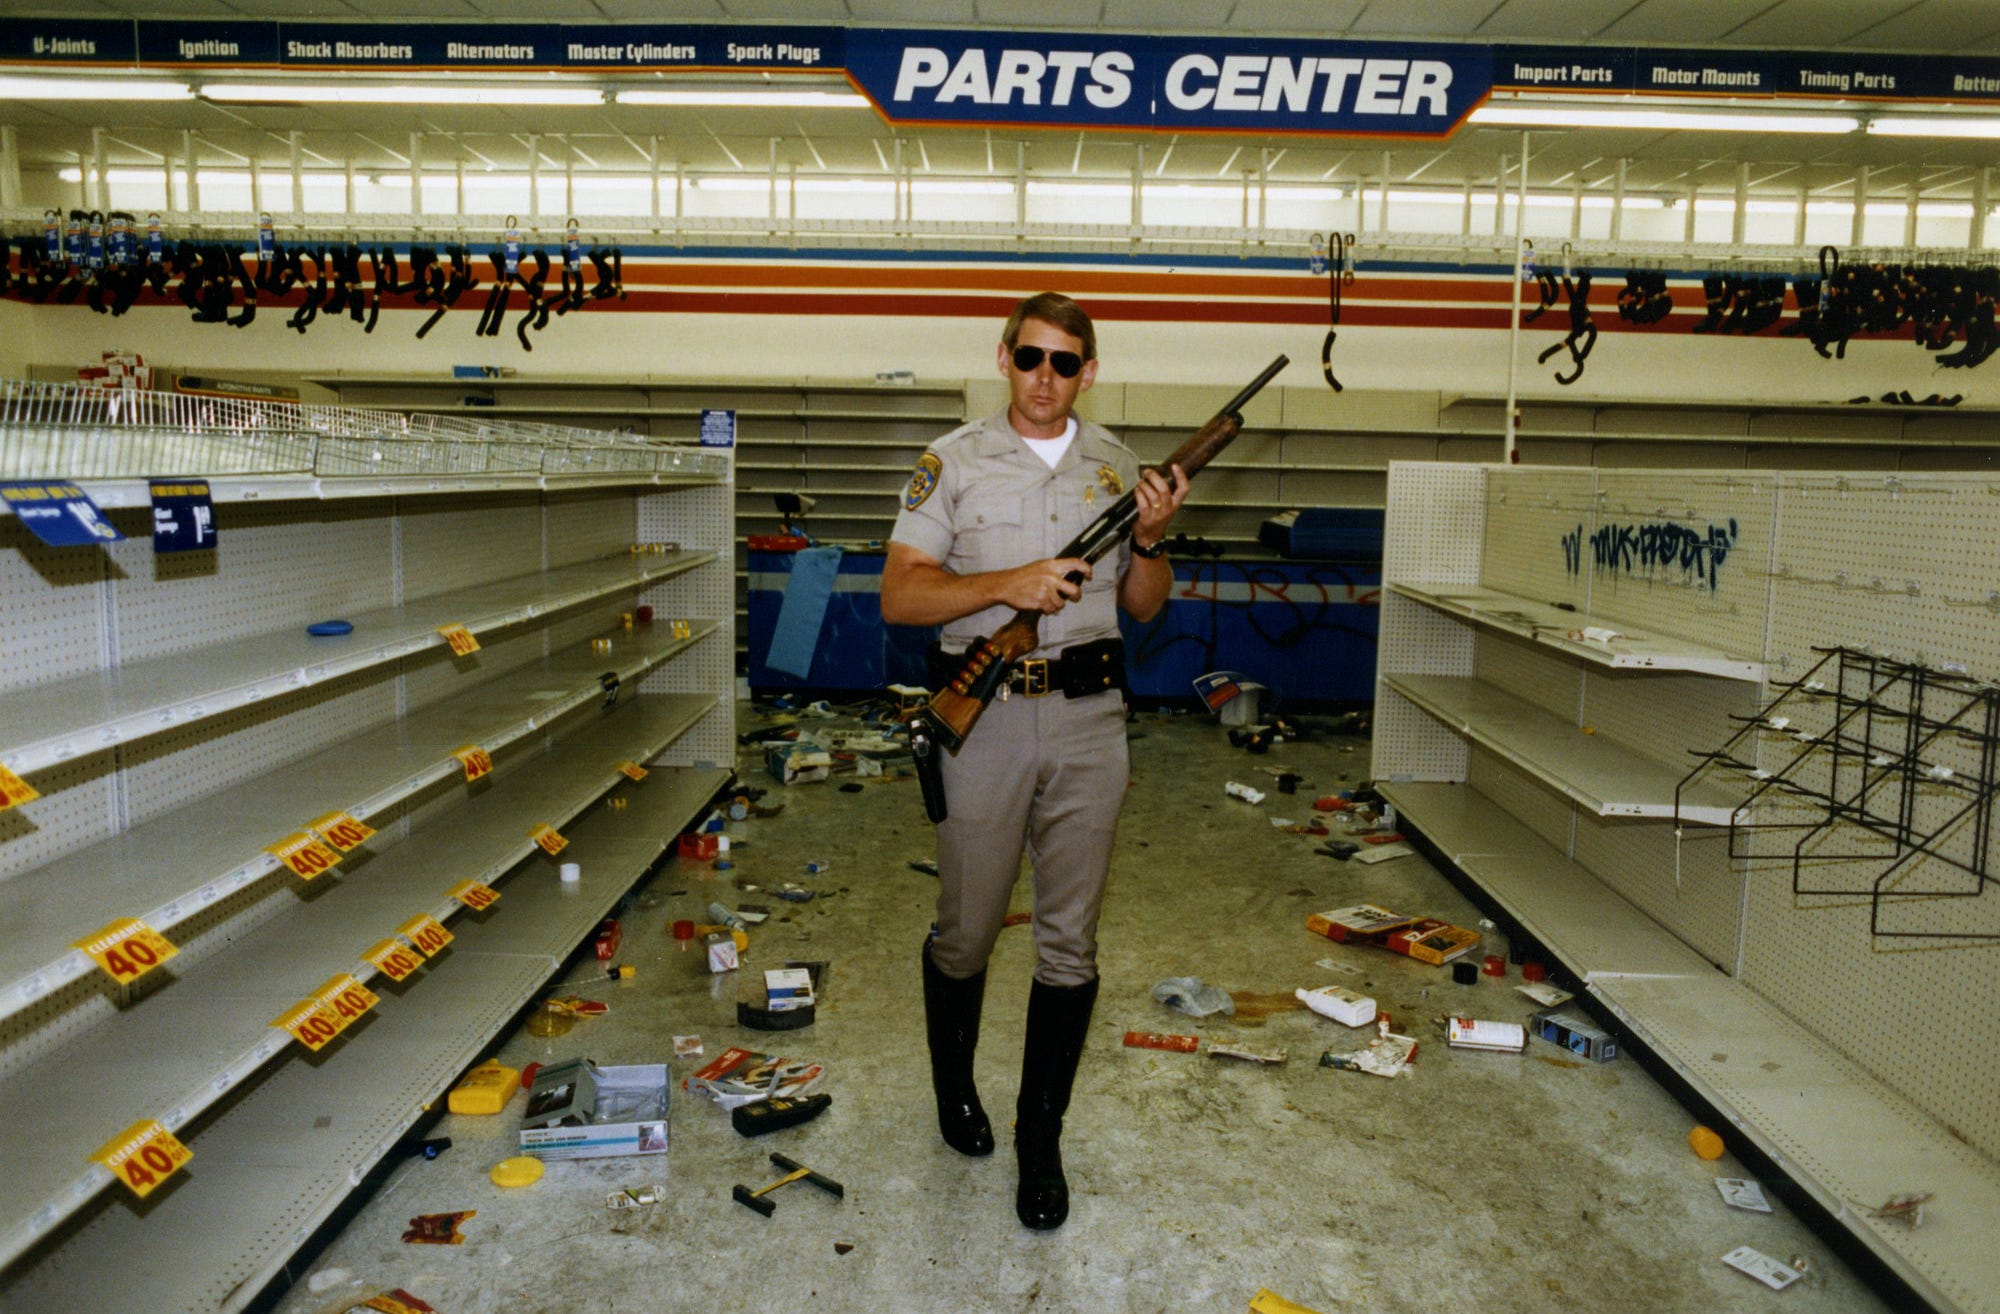 Snapshots of looting during the L.A. riots show anger, exuberance, and a ‘crime of opportunity’